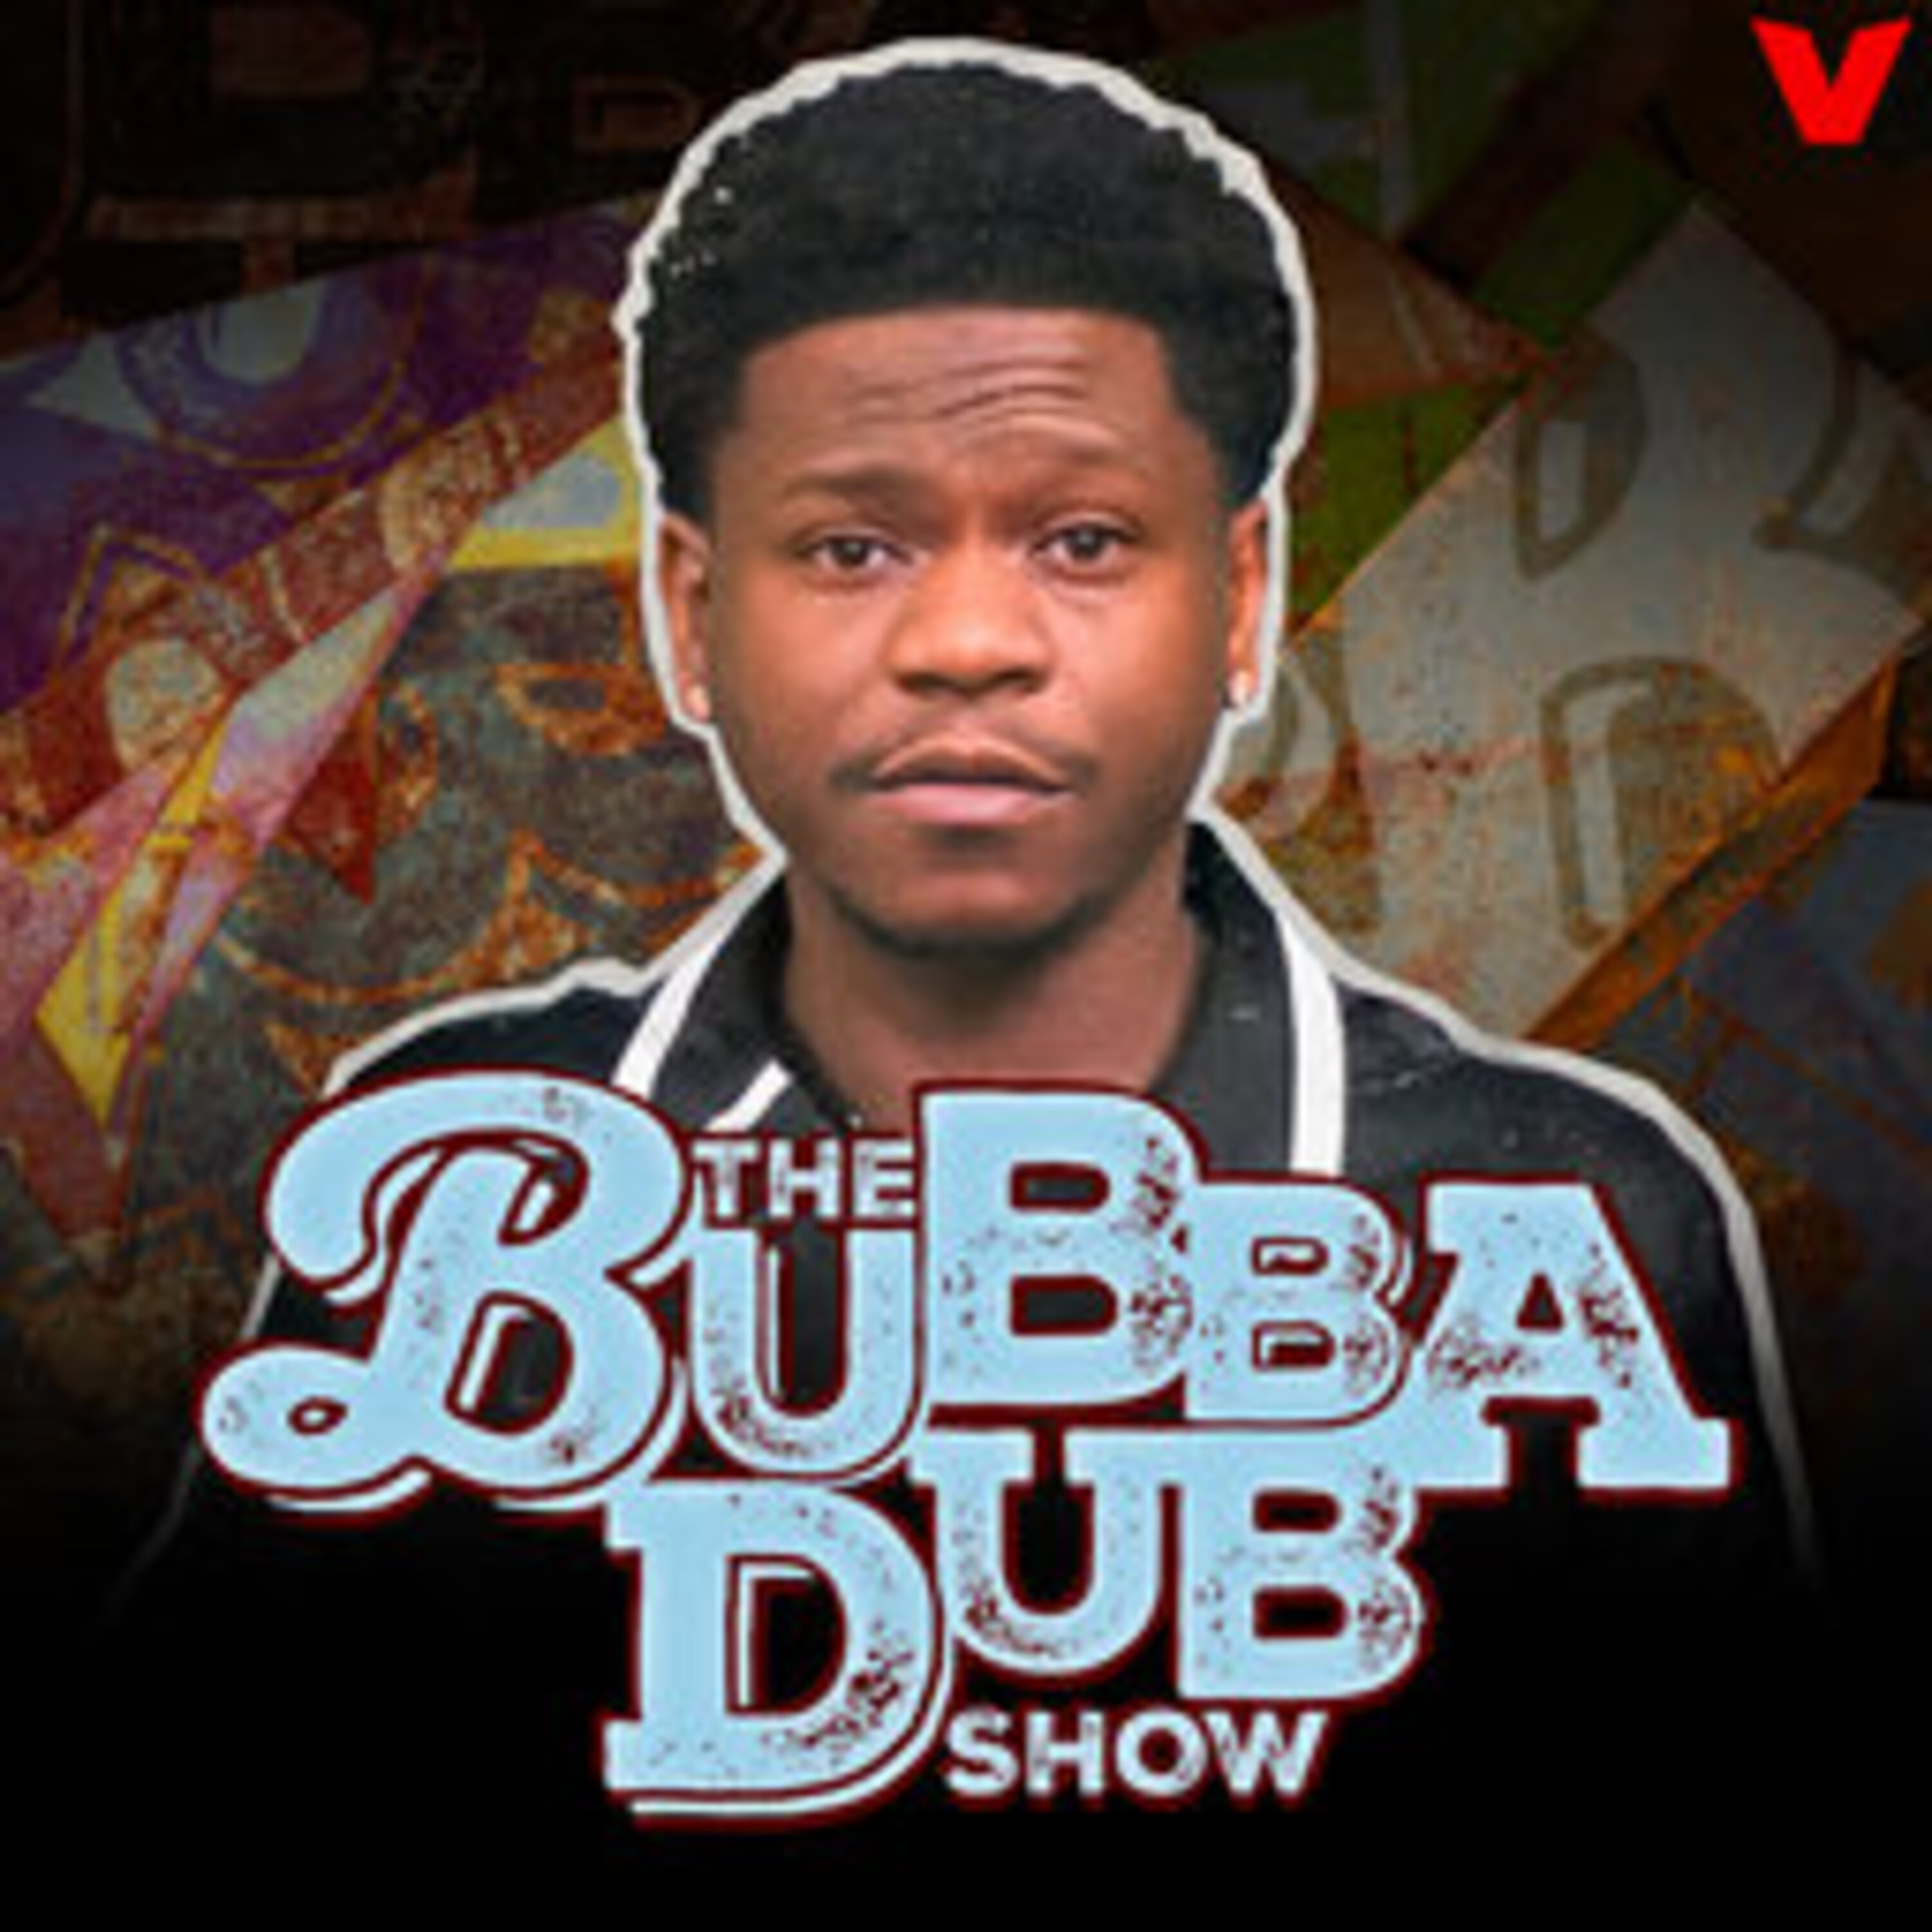 The Bubba Dub Show - Haney vs Garcia, Bulls Beat The Hawks, Advice For Kanye, Jason Kelce Gets Trashh of the Day by iHeartPodcasts and The Volume